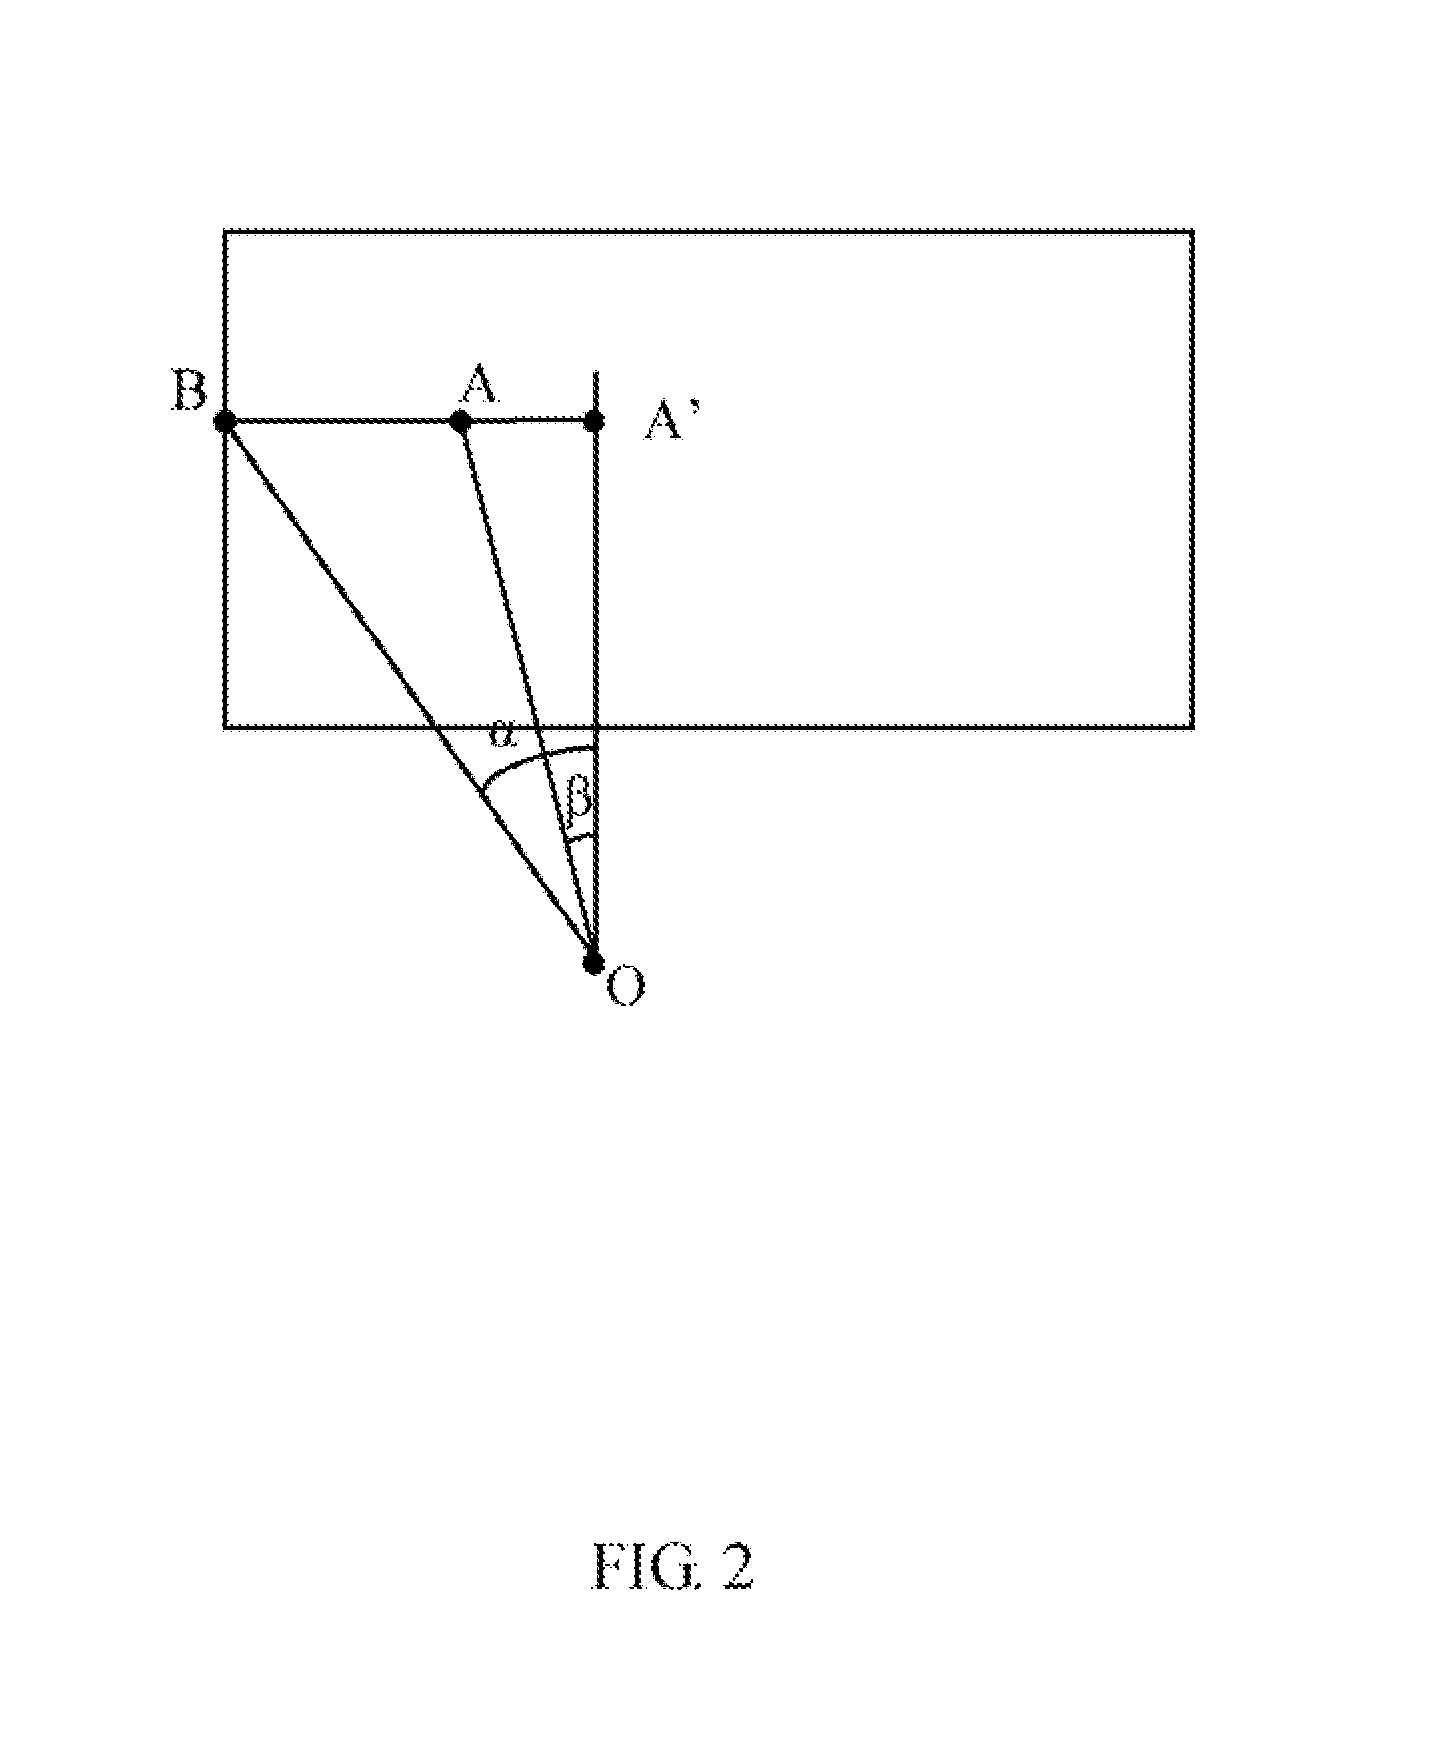 Baby monitoring system and method